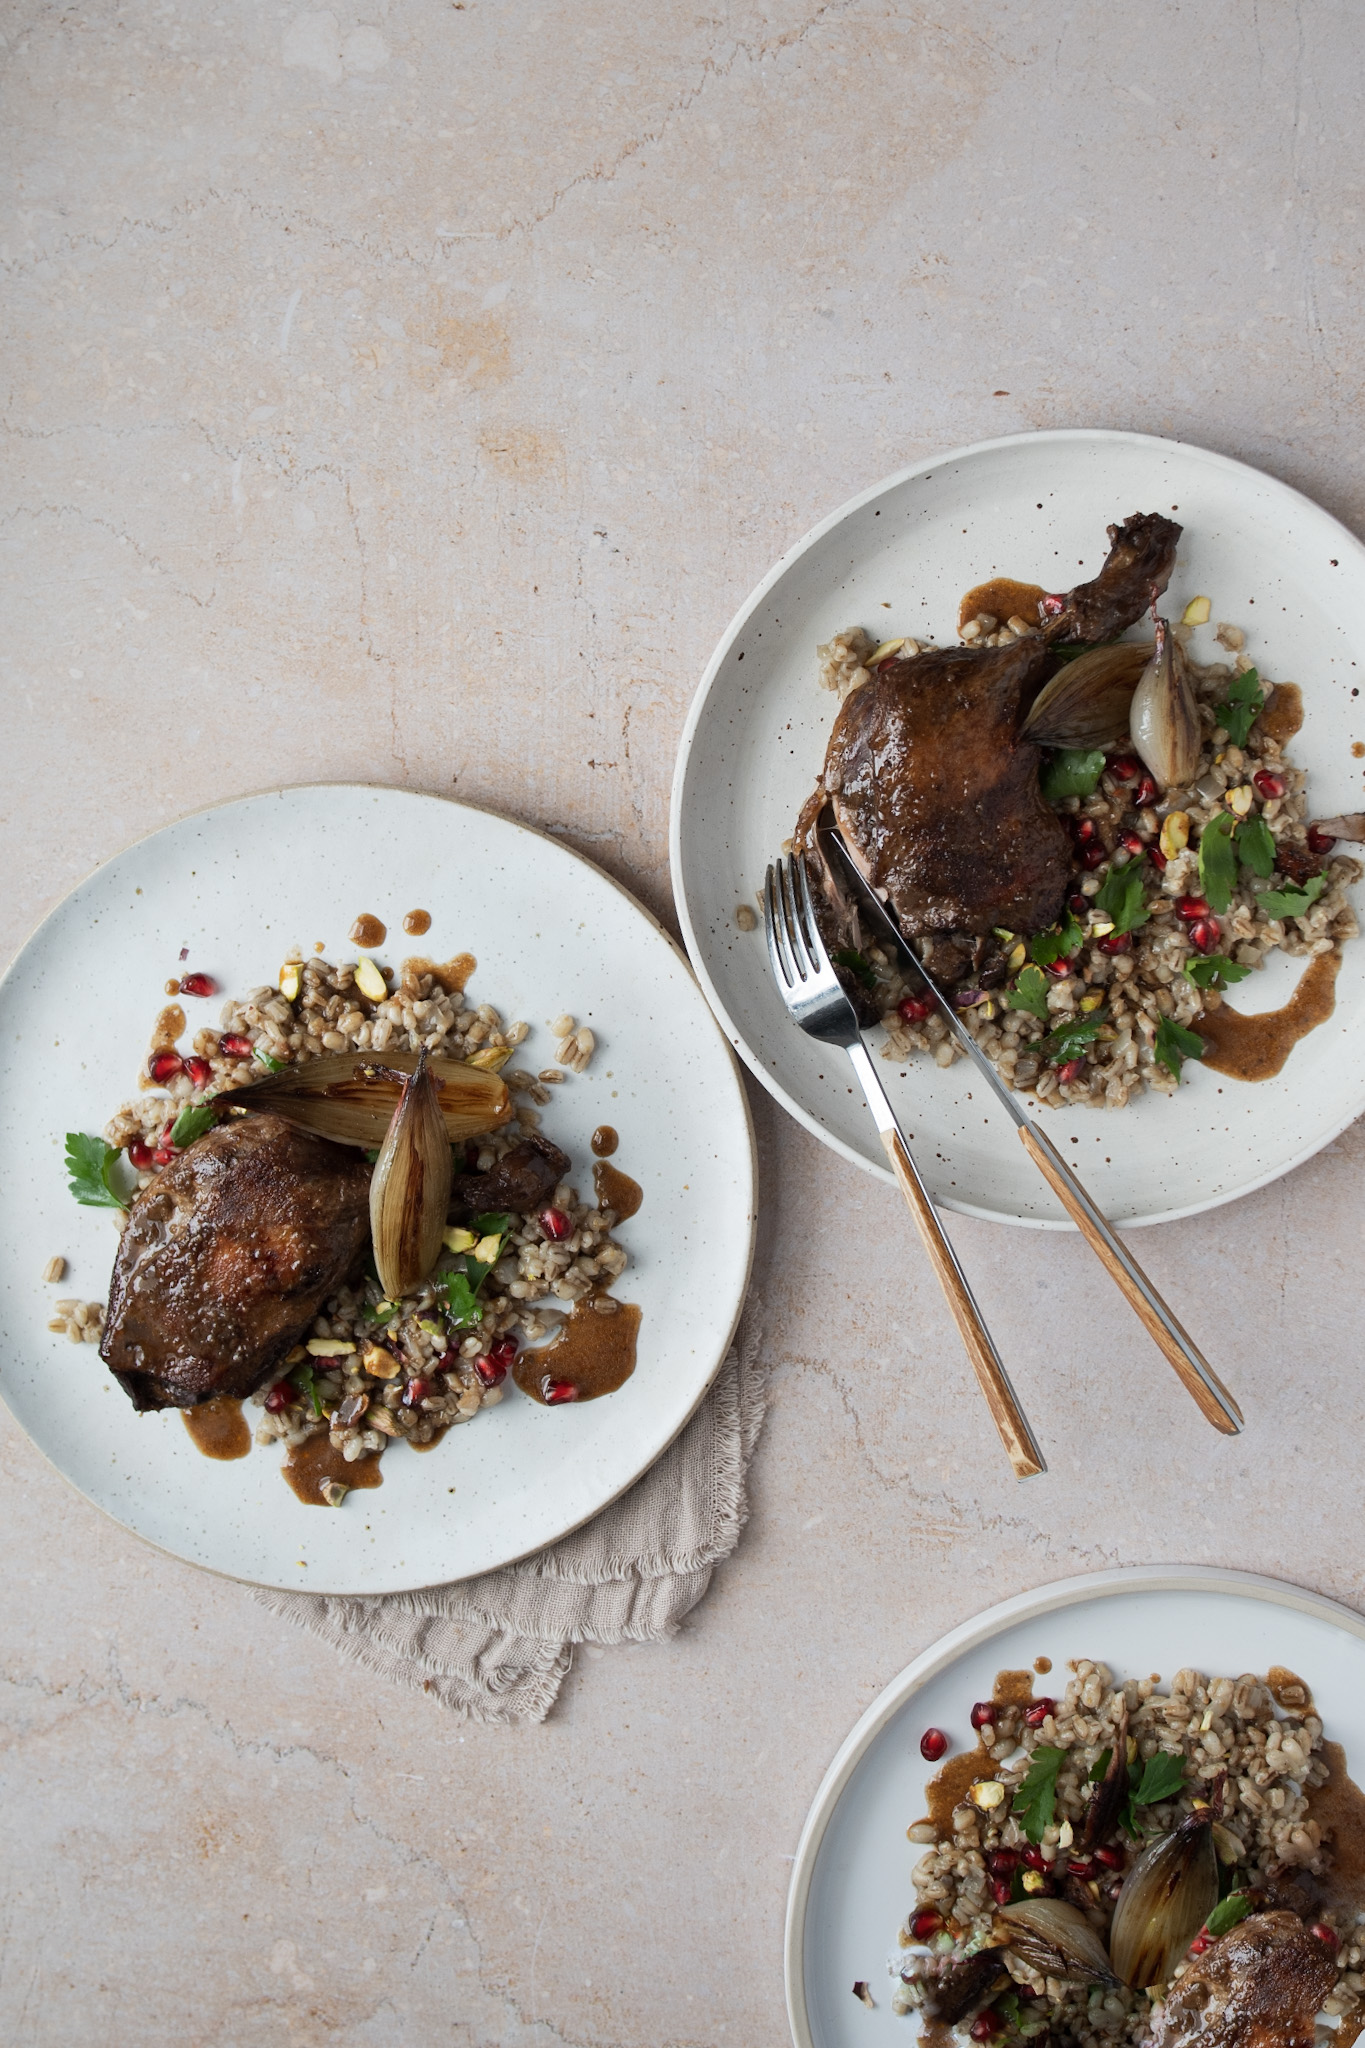 Braised duck with Spiced Barley